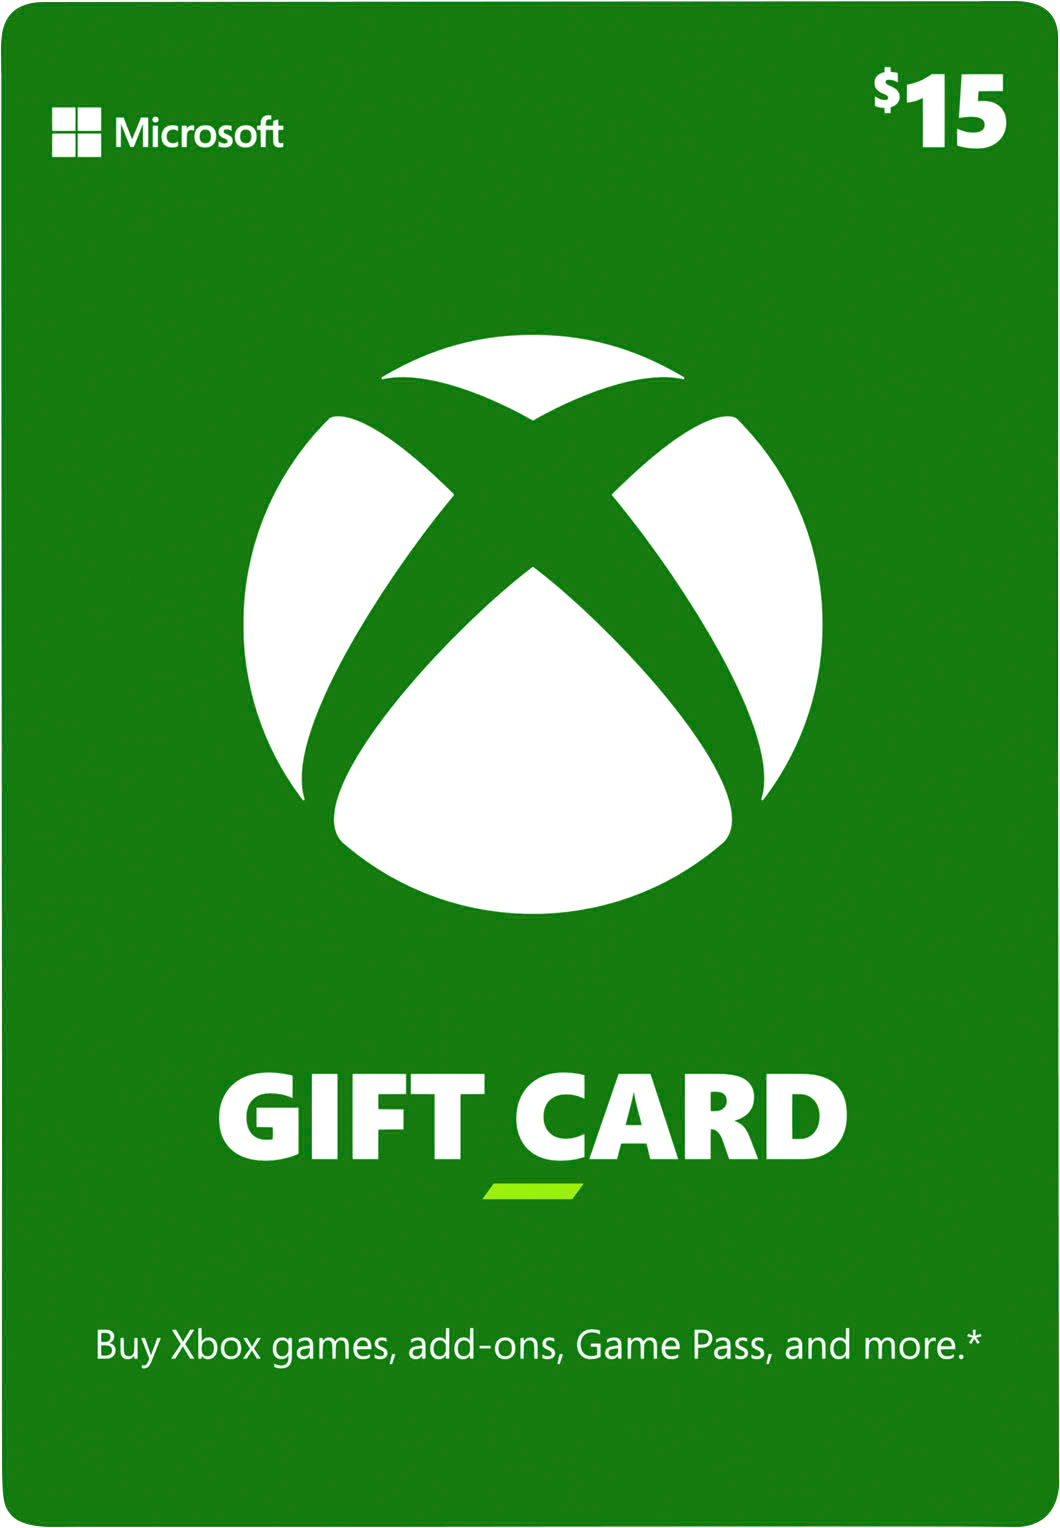 can i buy v bucks with a xbox gift card